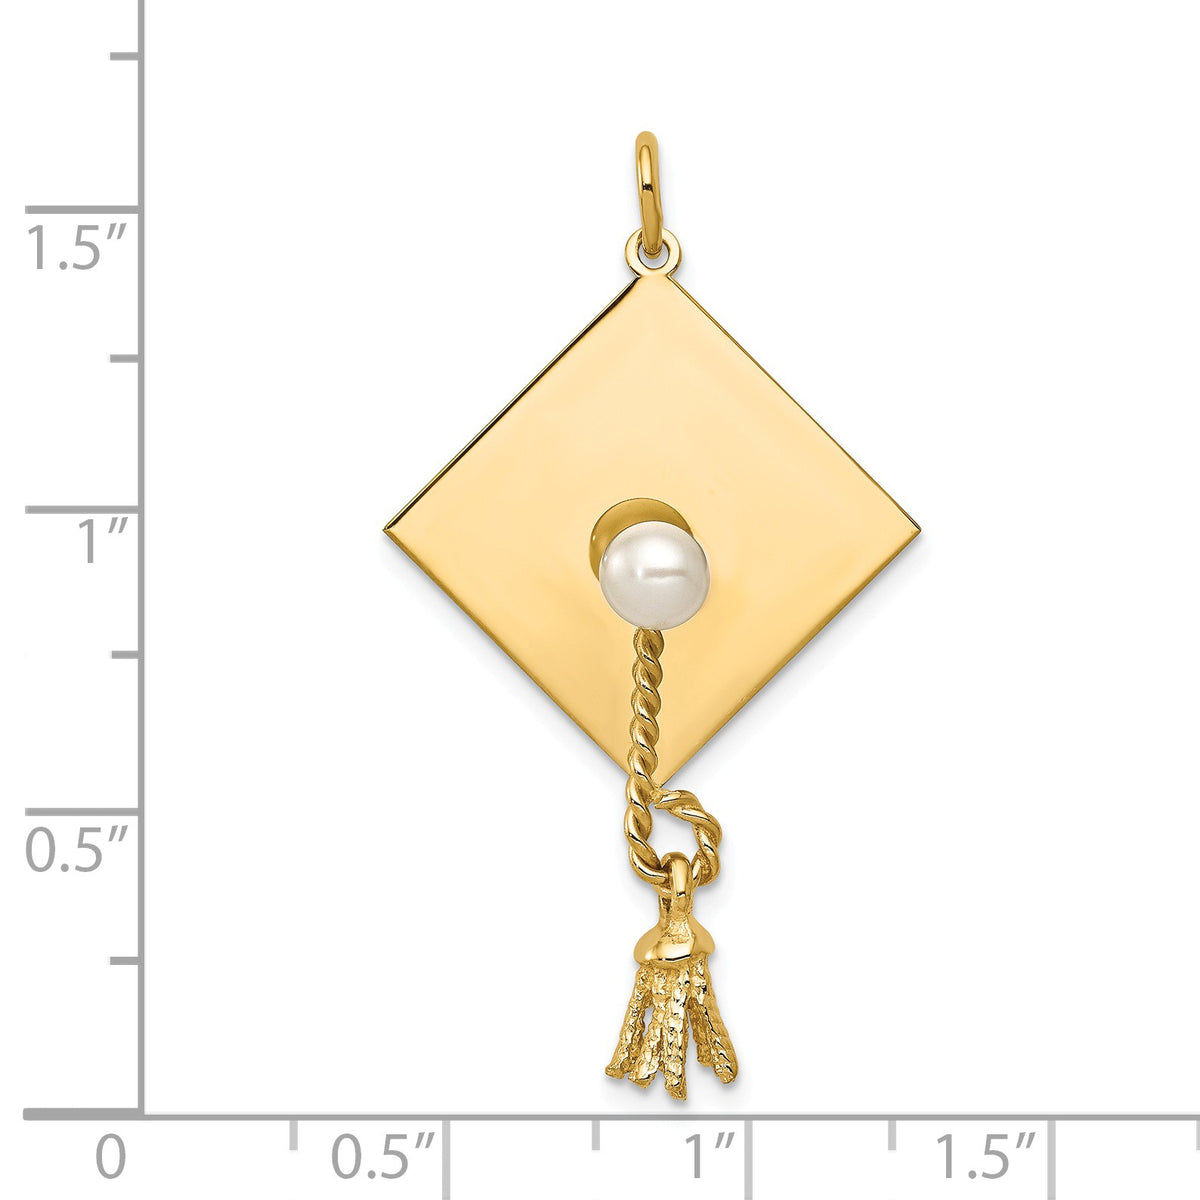 Alternate view of the 14k Yellow Gold &amp; Freshwater Cultured Pearl Graduation Cap Charm, 22mm by The Black Bow Jewelry Co.